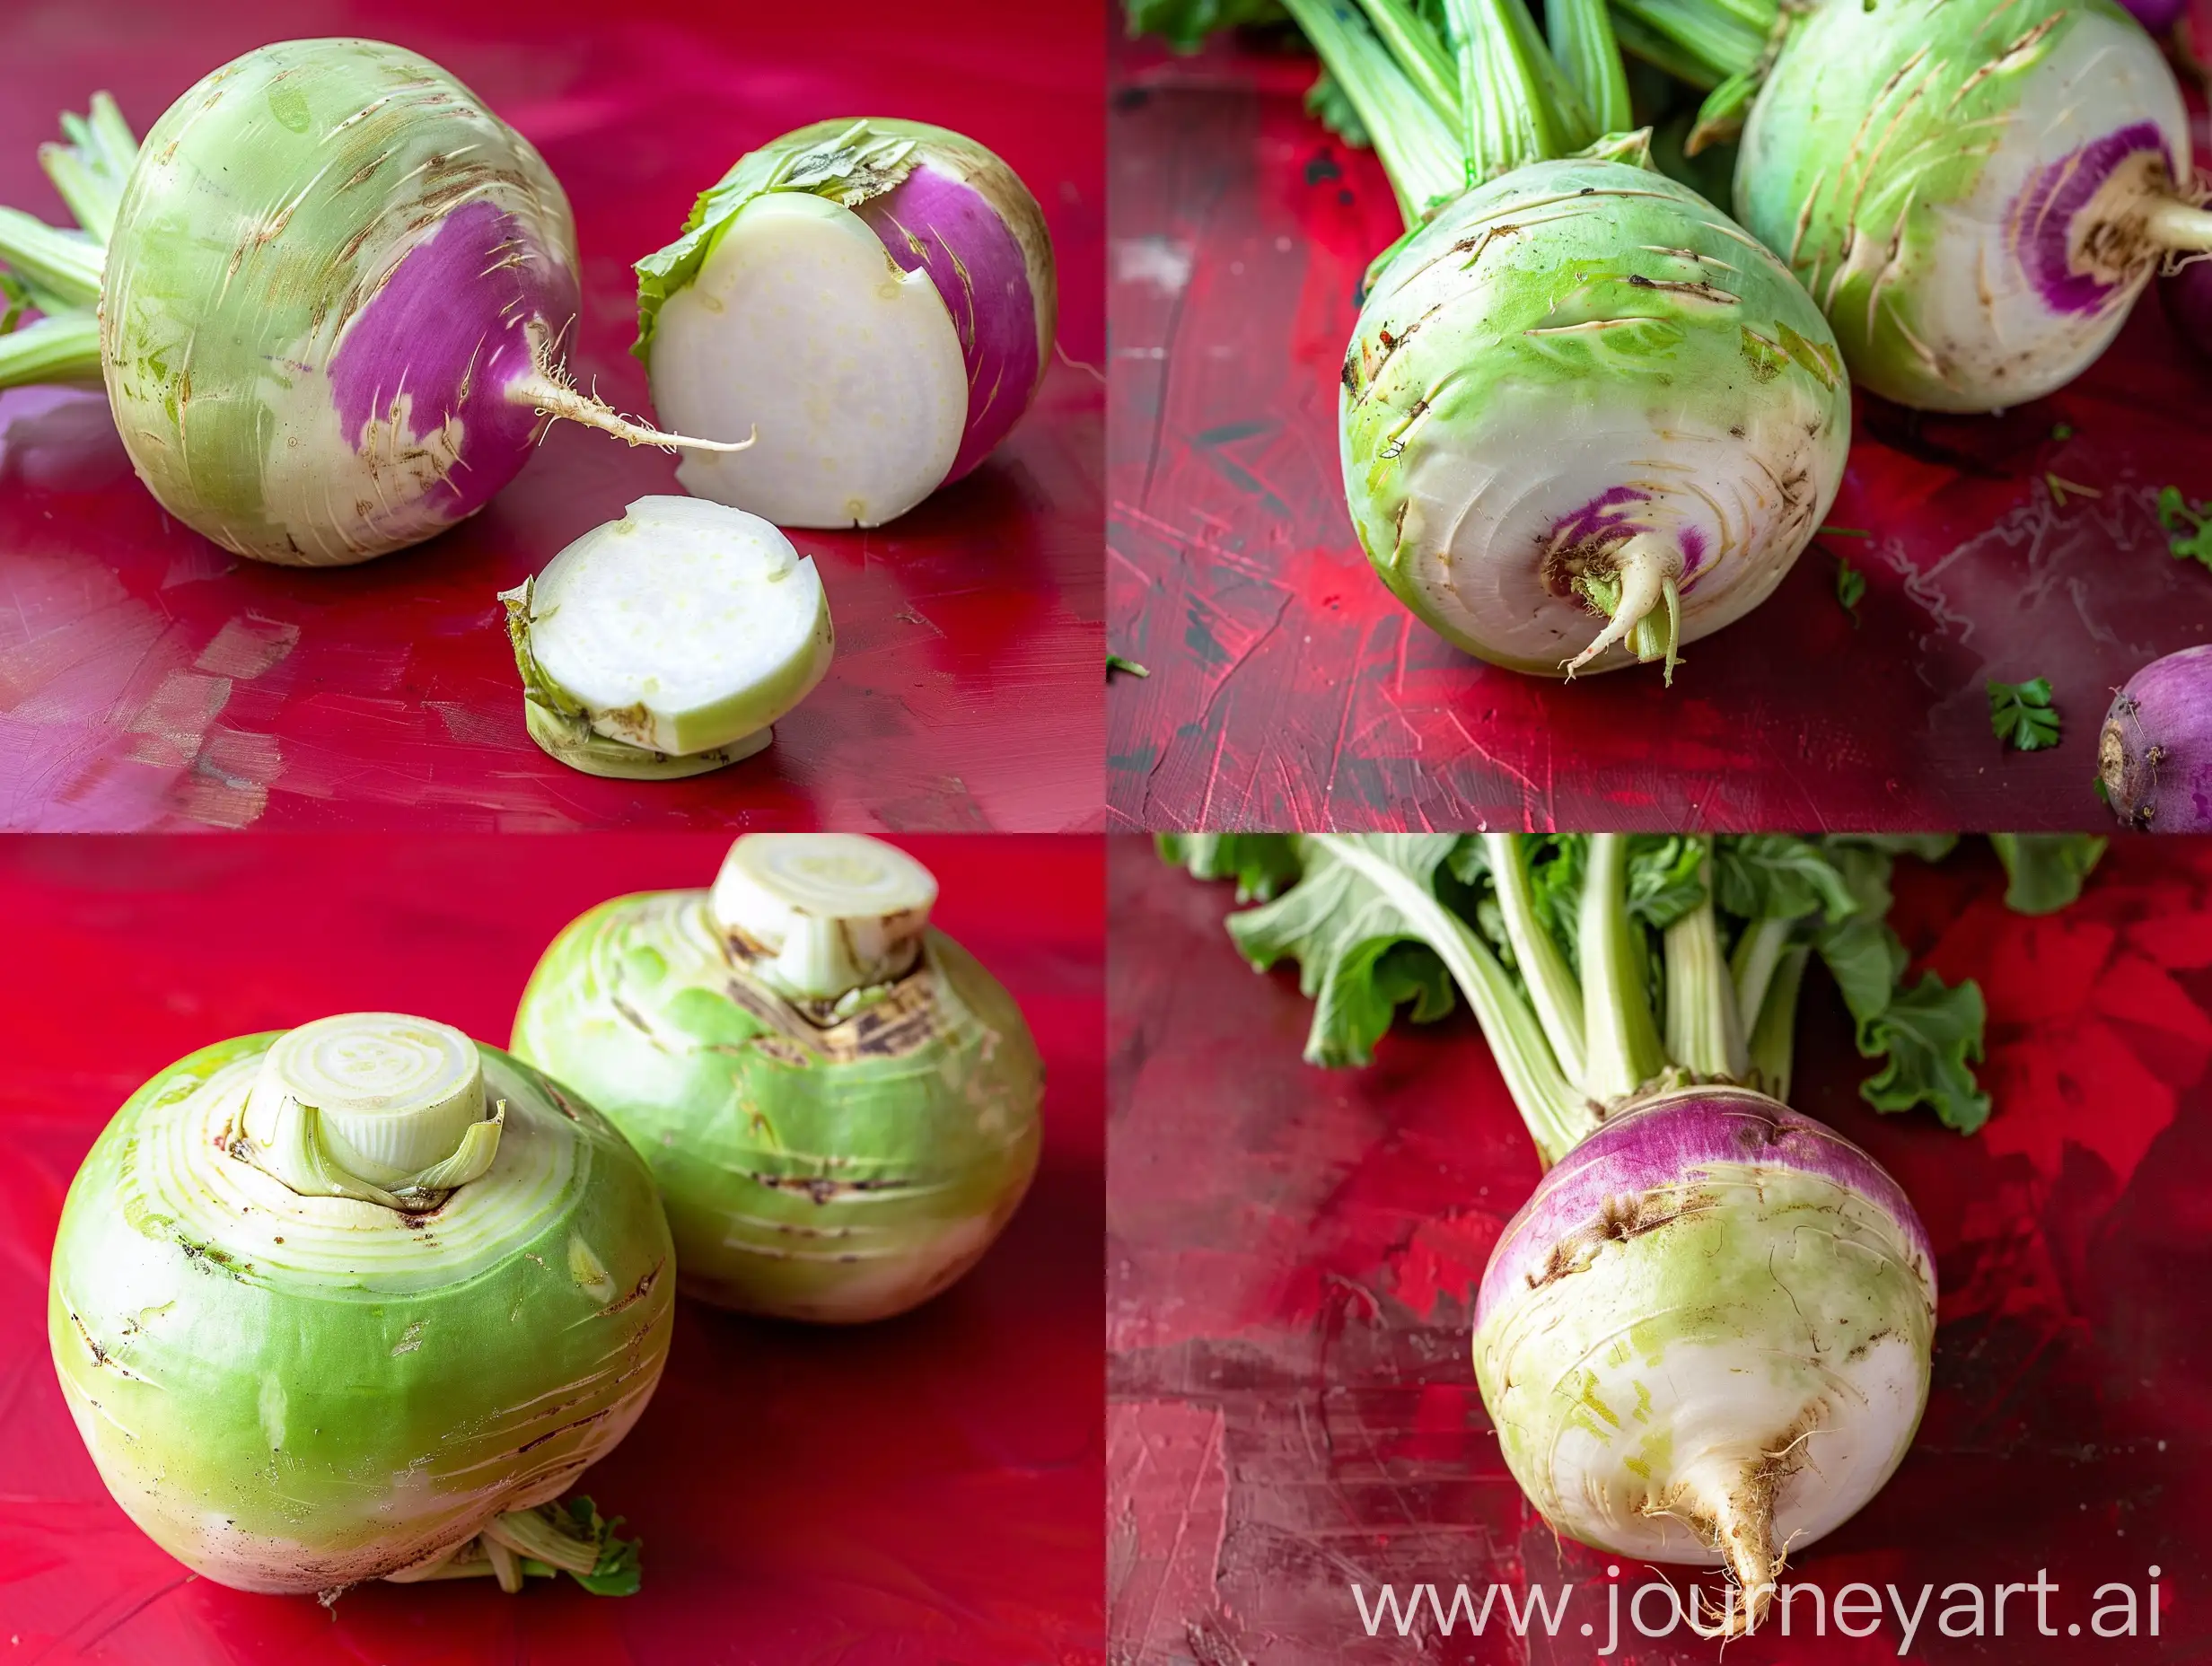 Real photo of turnip with red background